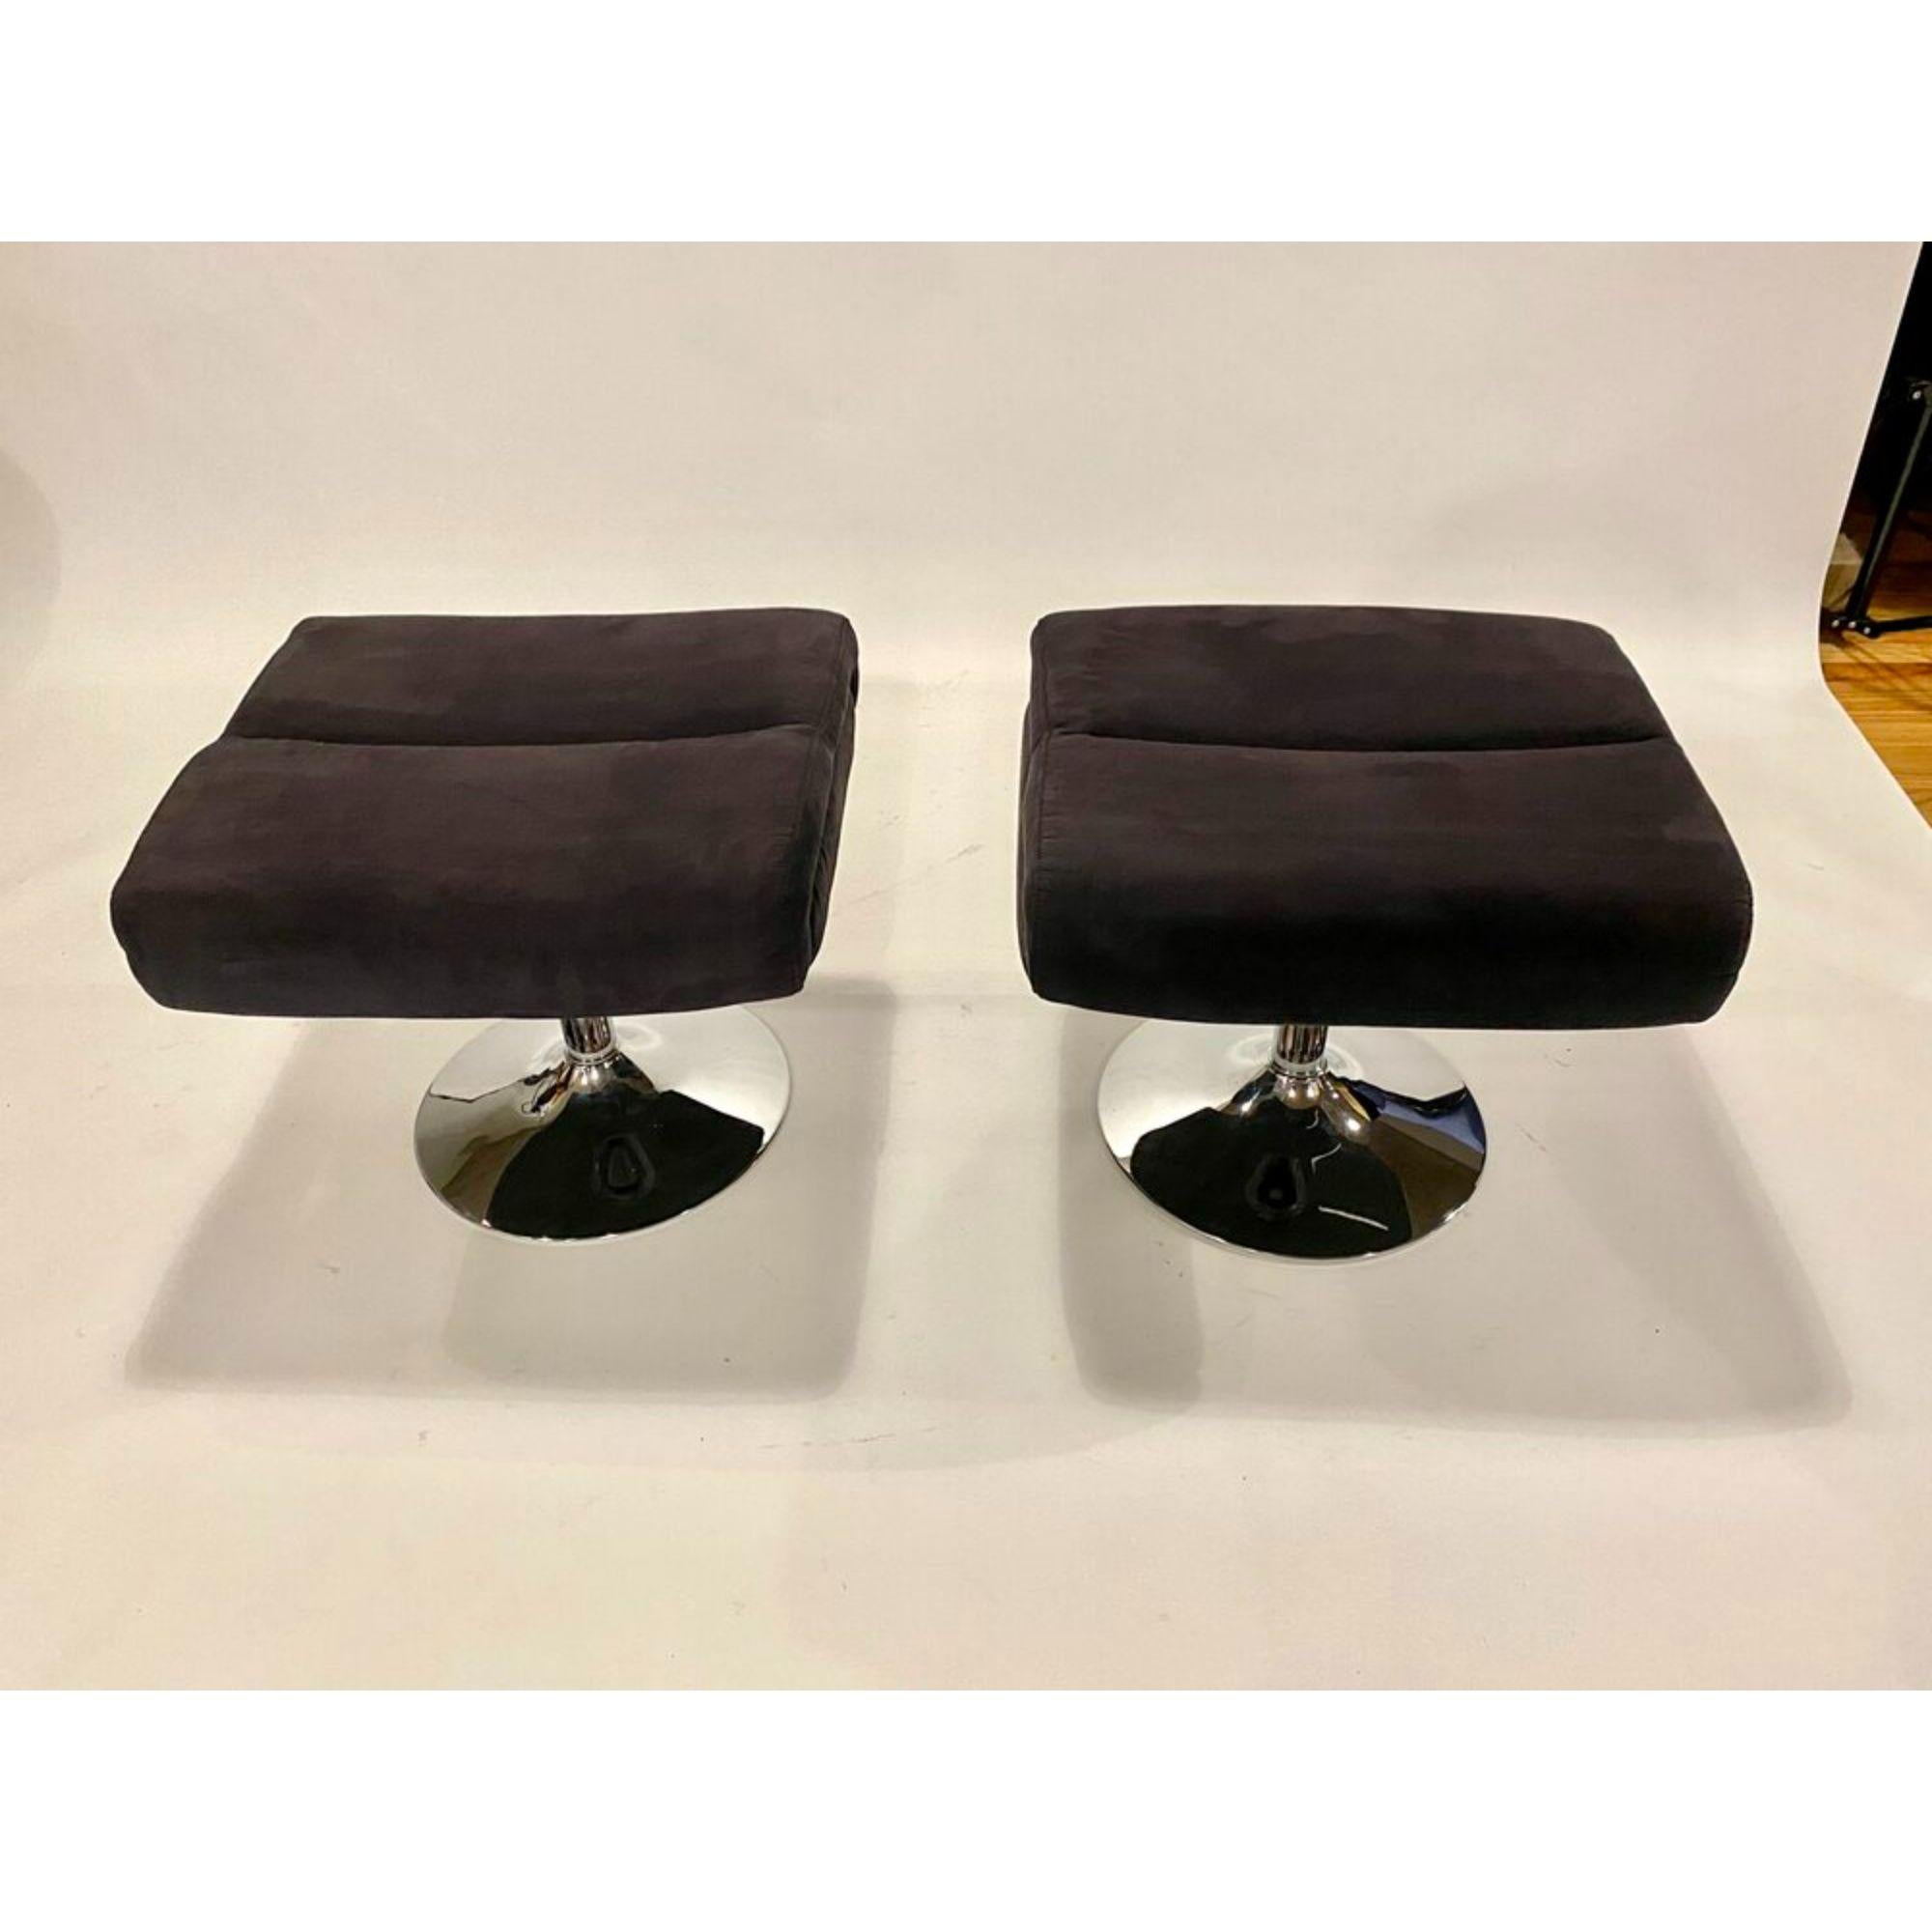 Polished Pair of Vintage Swivel High Back Orb Chairs and Ottomans in Black Fabric & Metal